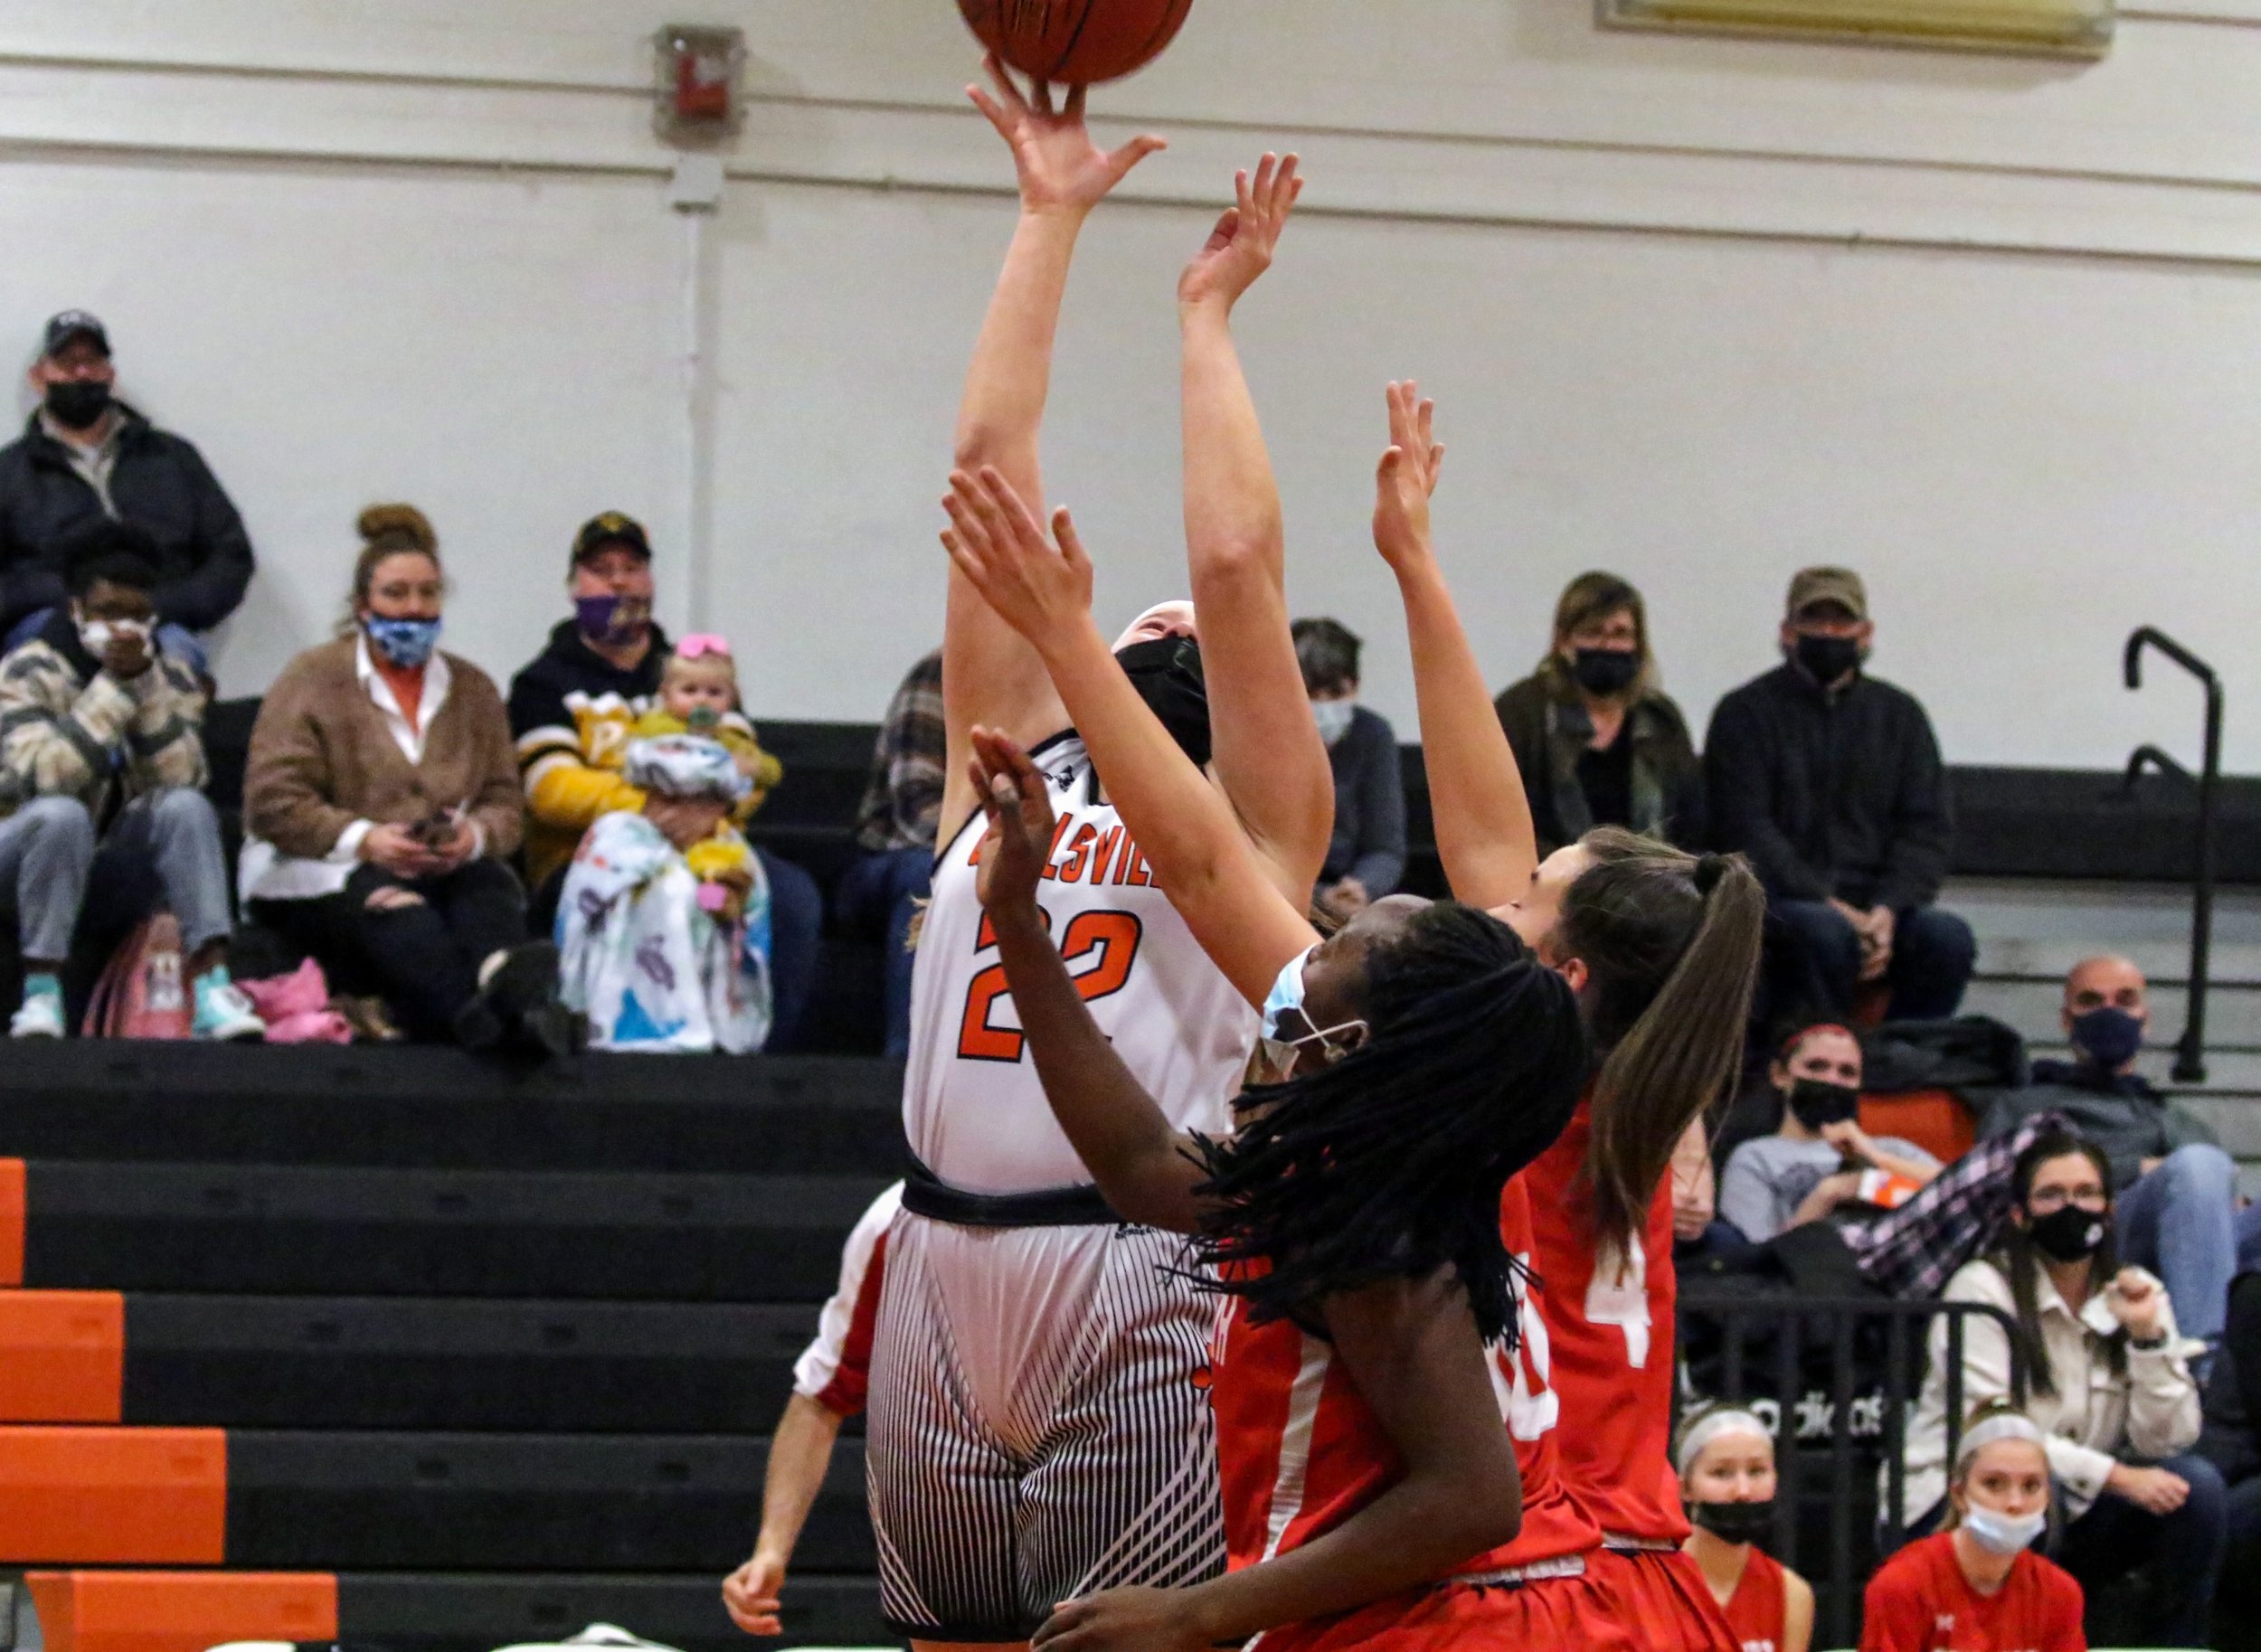  Wellsville junior Sara Reitz (22) goes up for the basket while under pressure from the Letchworth defense during Saturday night’s home contest in Wellsville. [Chris Brooks/WellsvilleSports.com] 